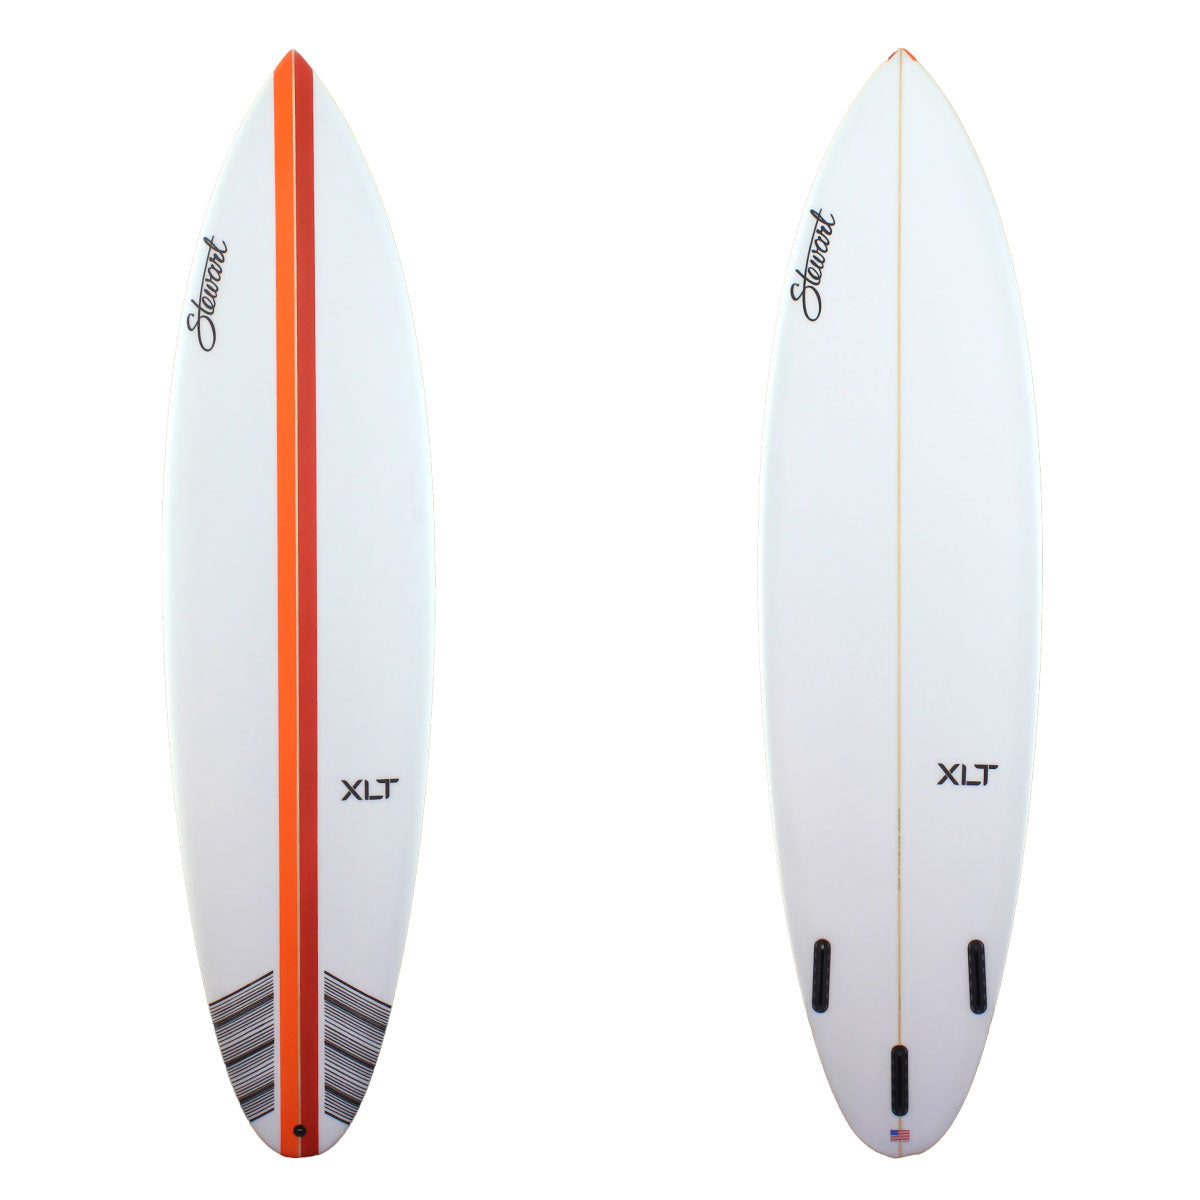 Stewart Surfboards 7'4" XLT shortboard with a orange and a red stripe on deck